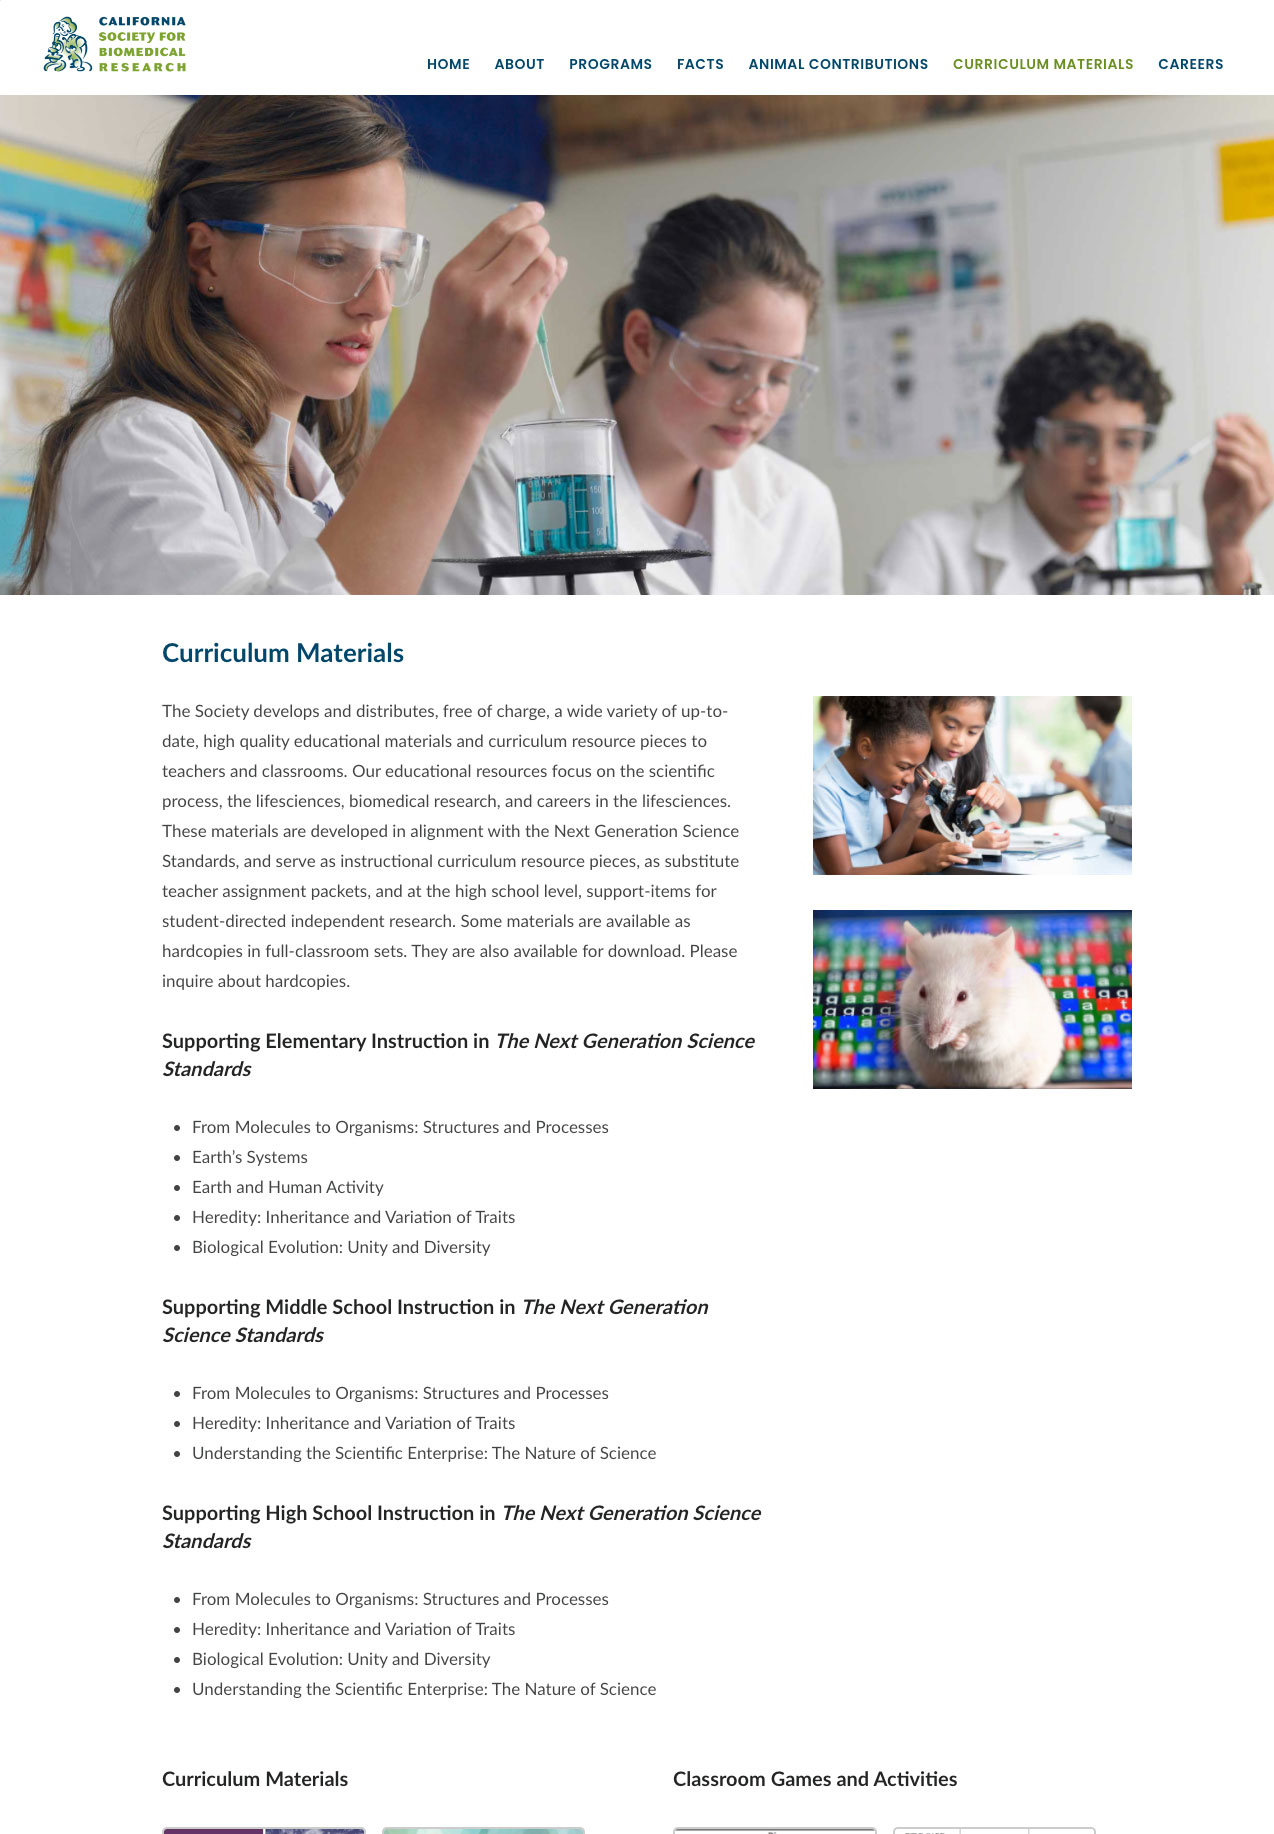 Curriculum Materials Page